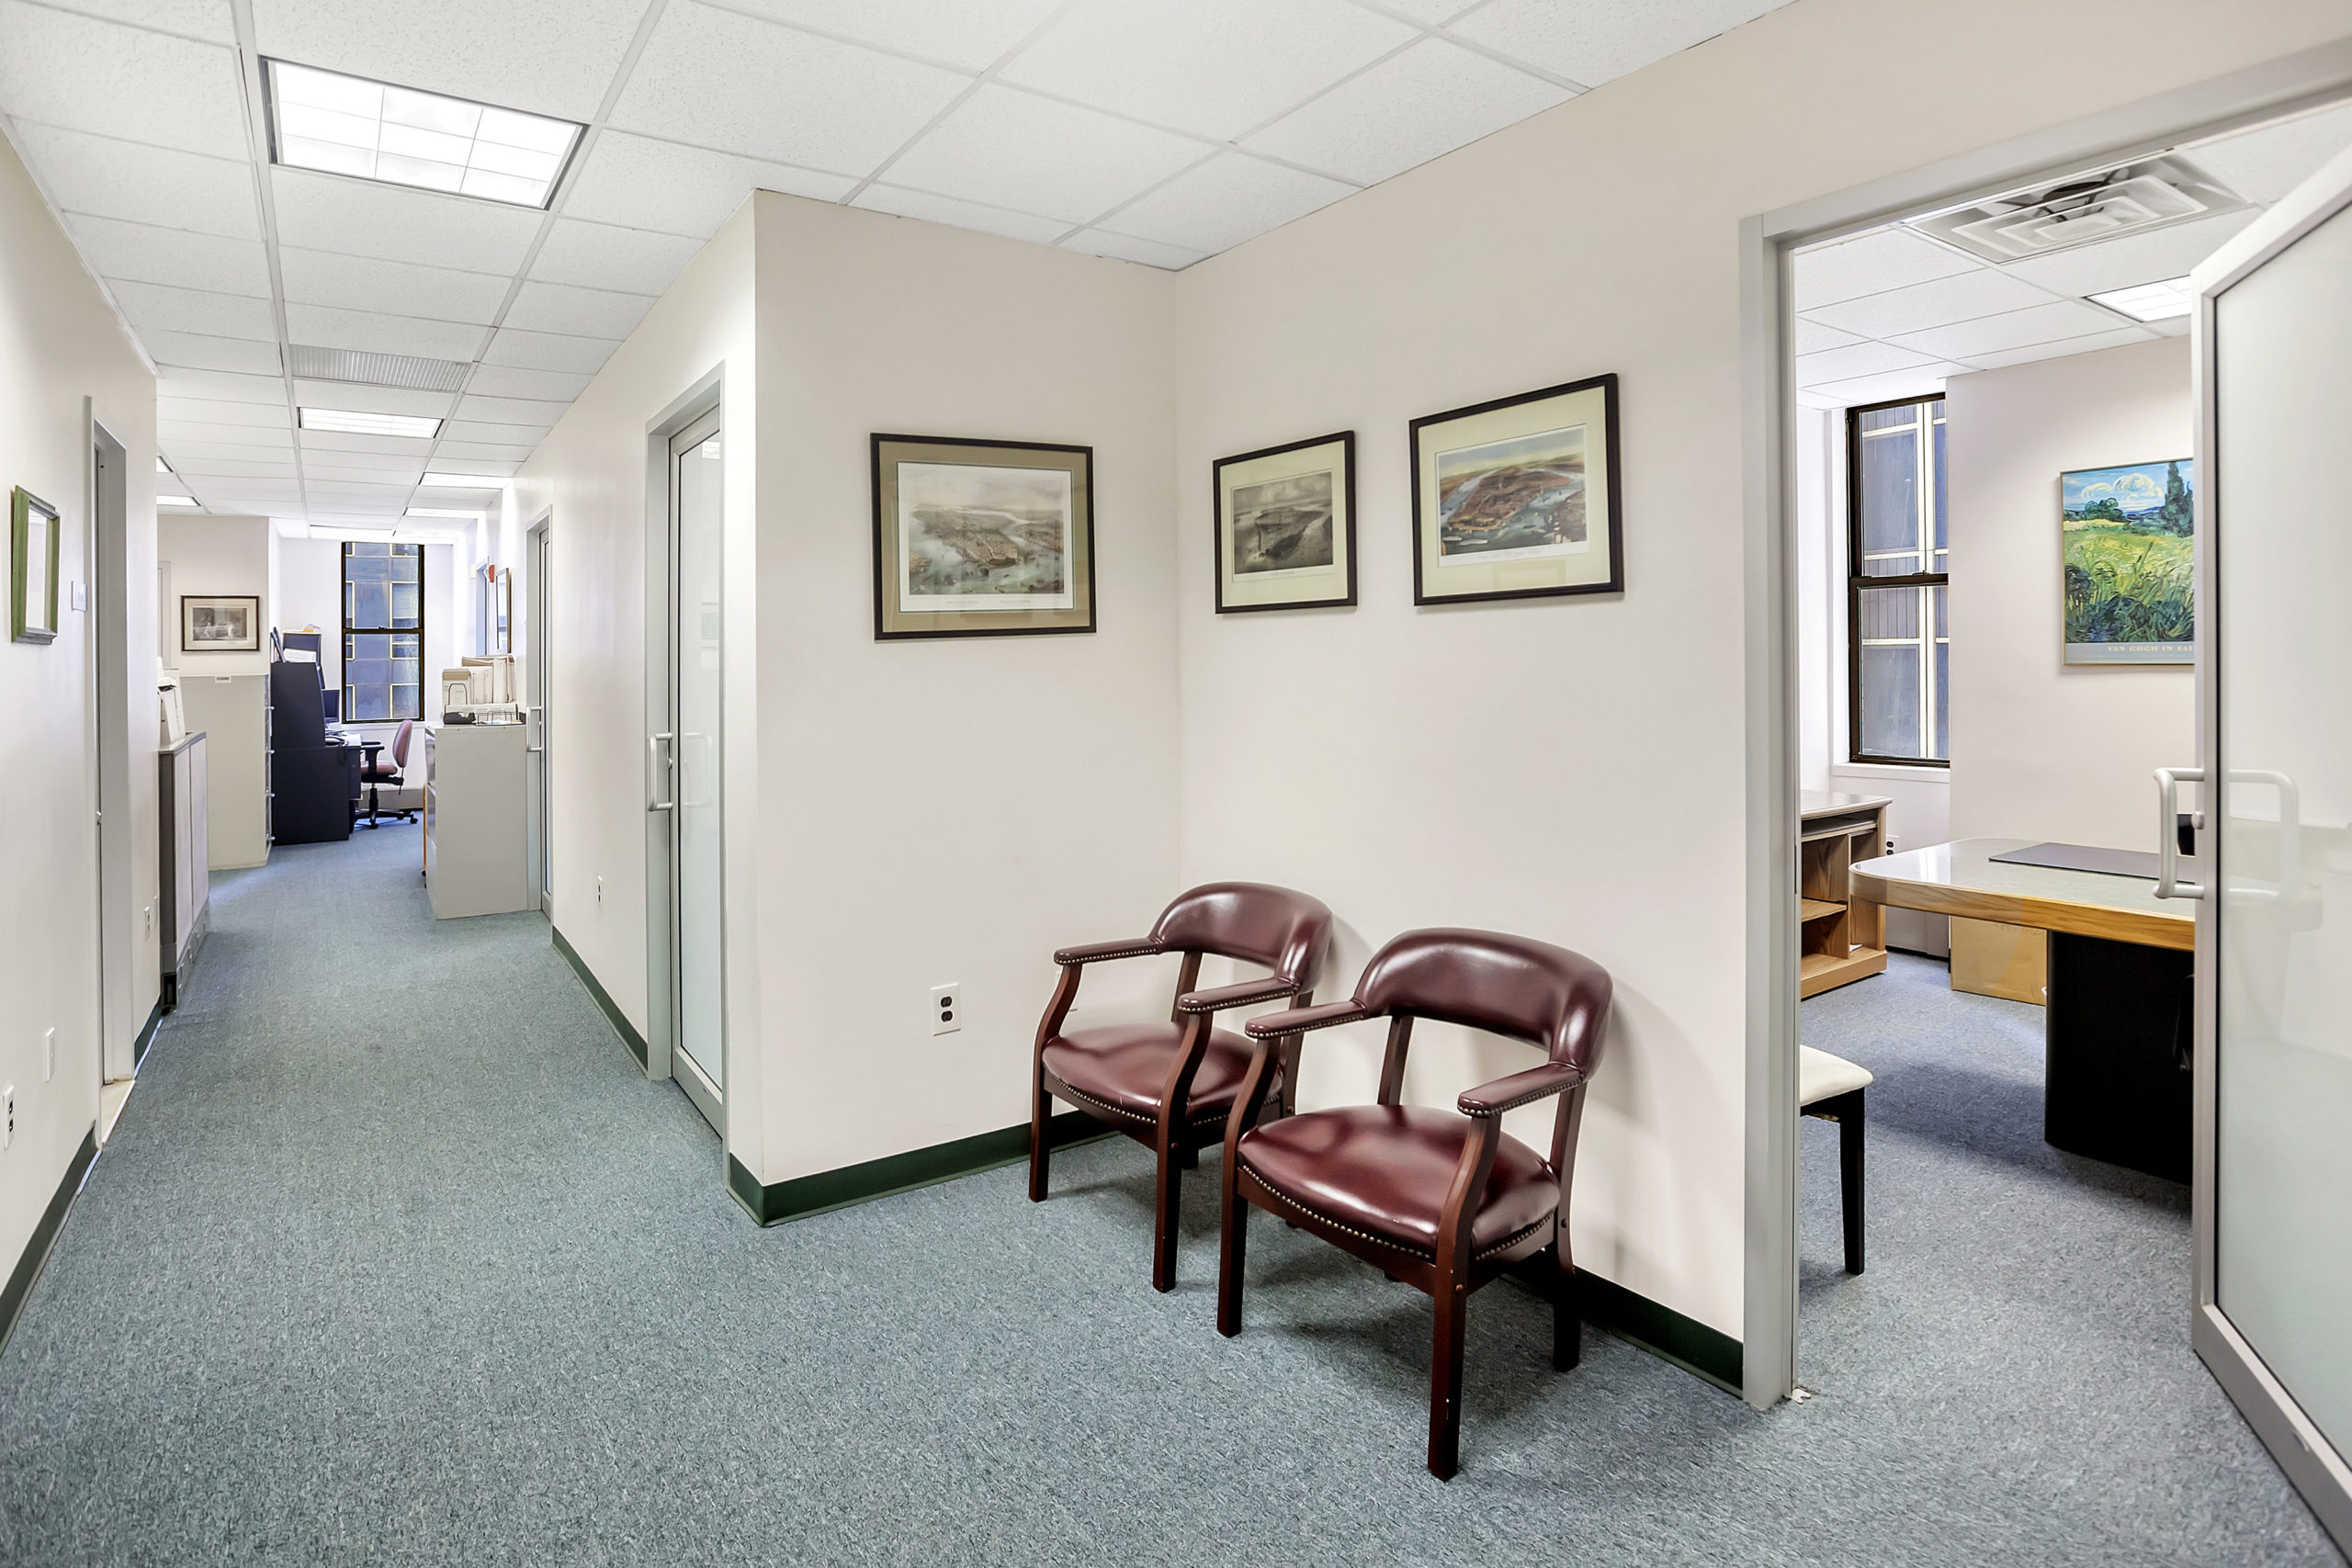 Photo of office space at 27 Whitehall Street, 4th Floor, in Lower Manhattan.